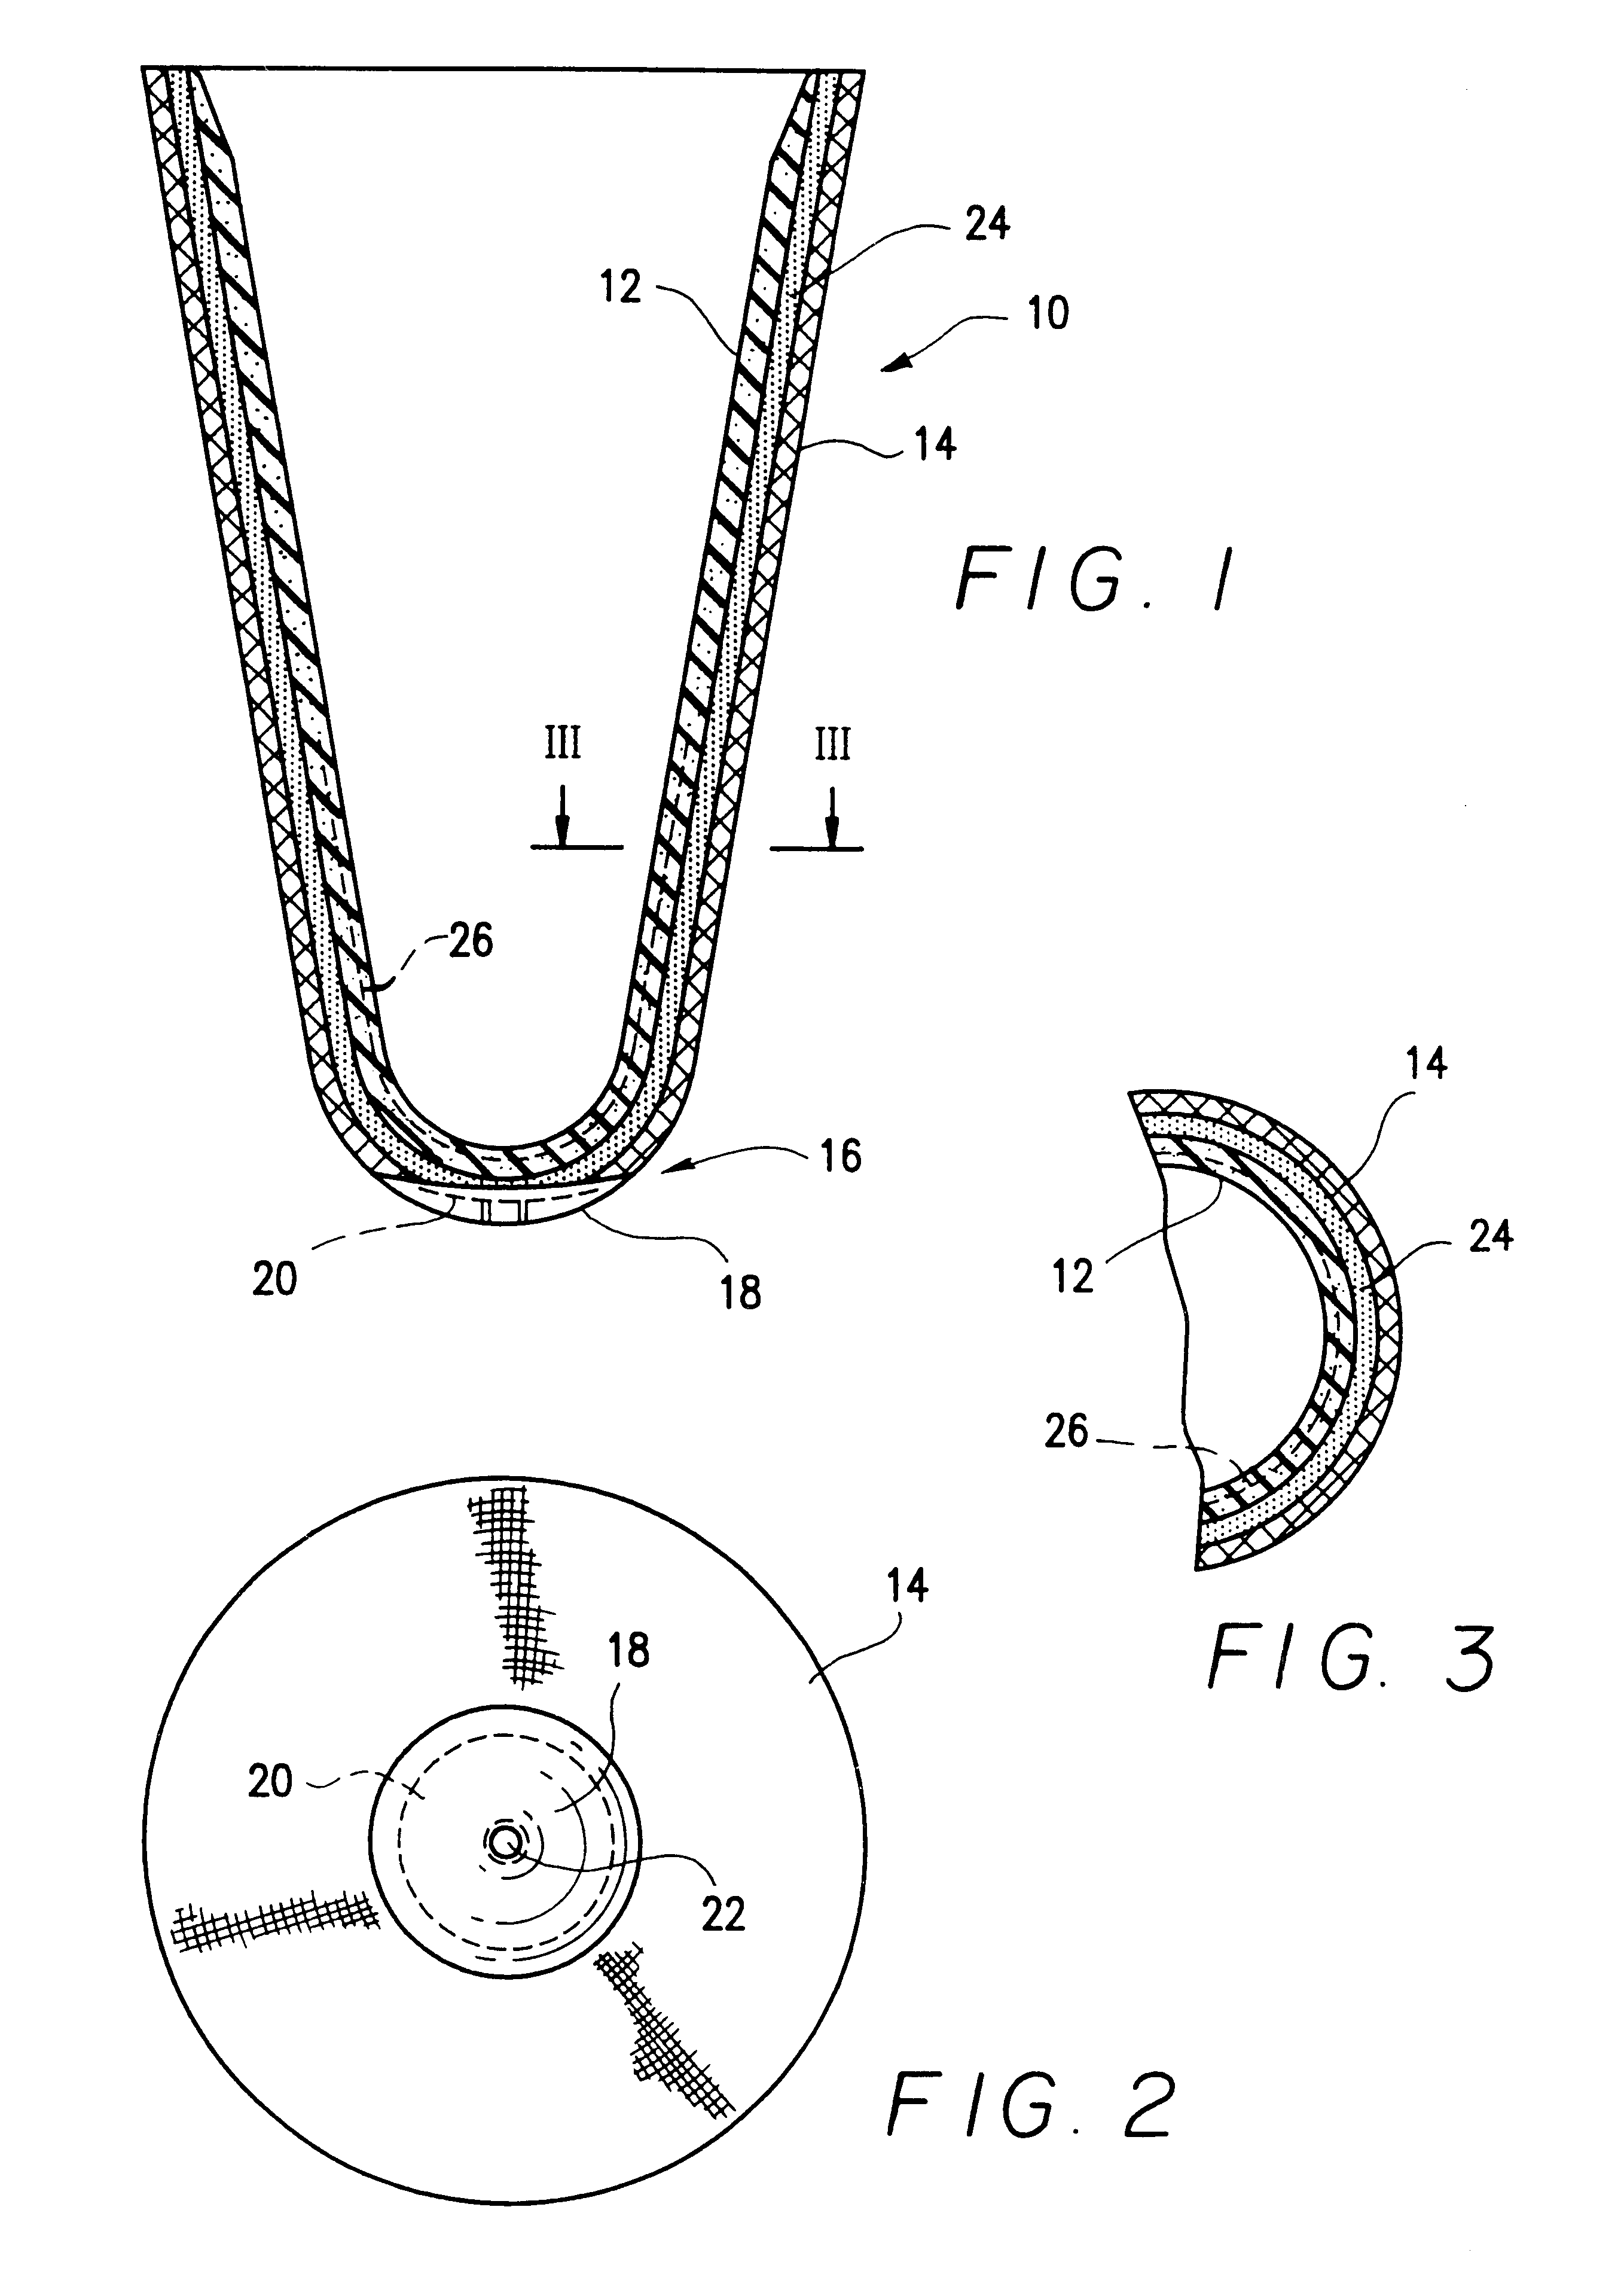 Apparatus and process for making prosthetic suction sleeve